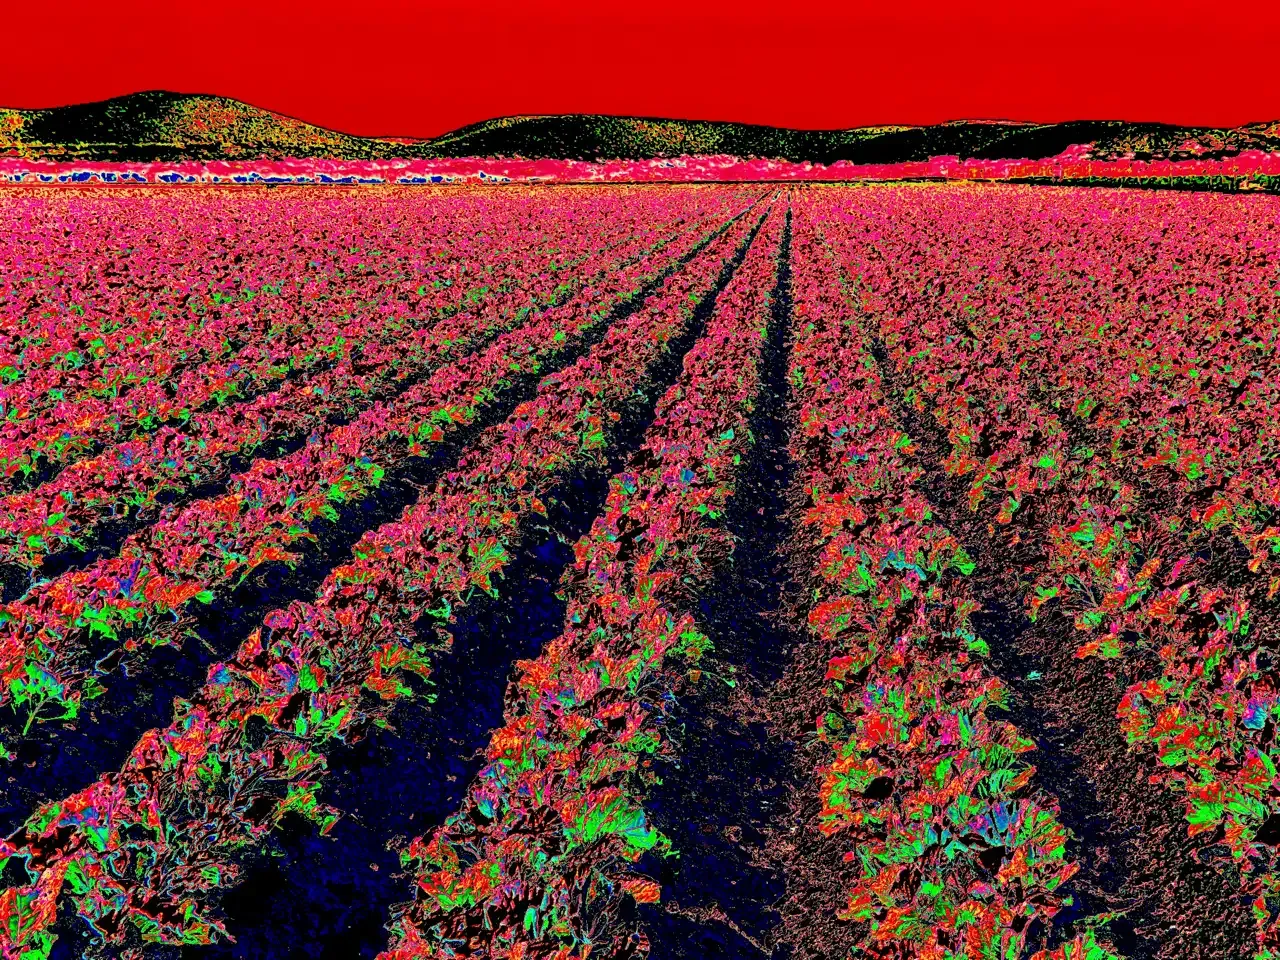 green and red collards planted in rows, the sky is blood red